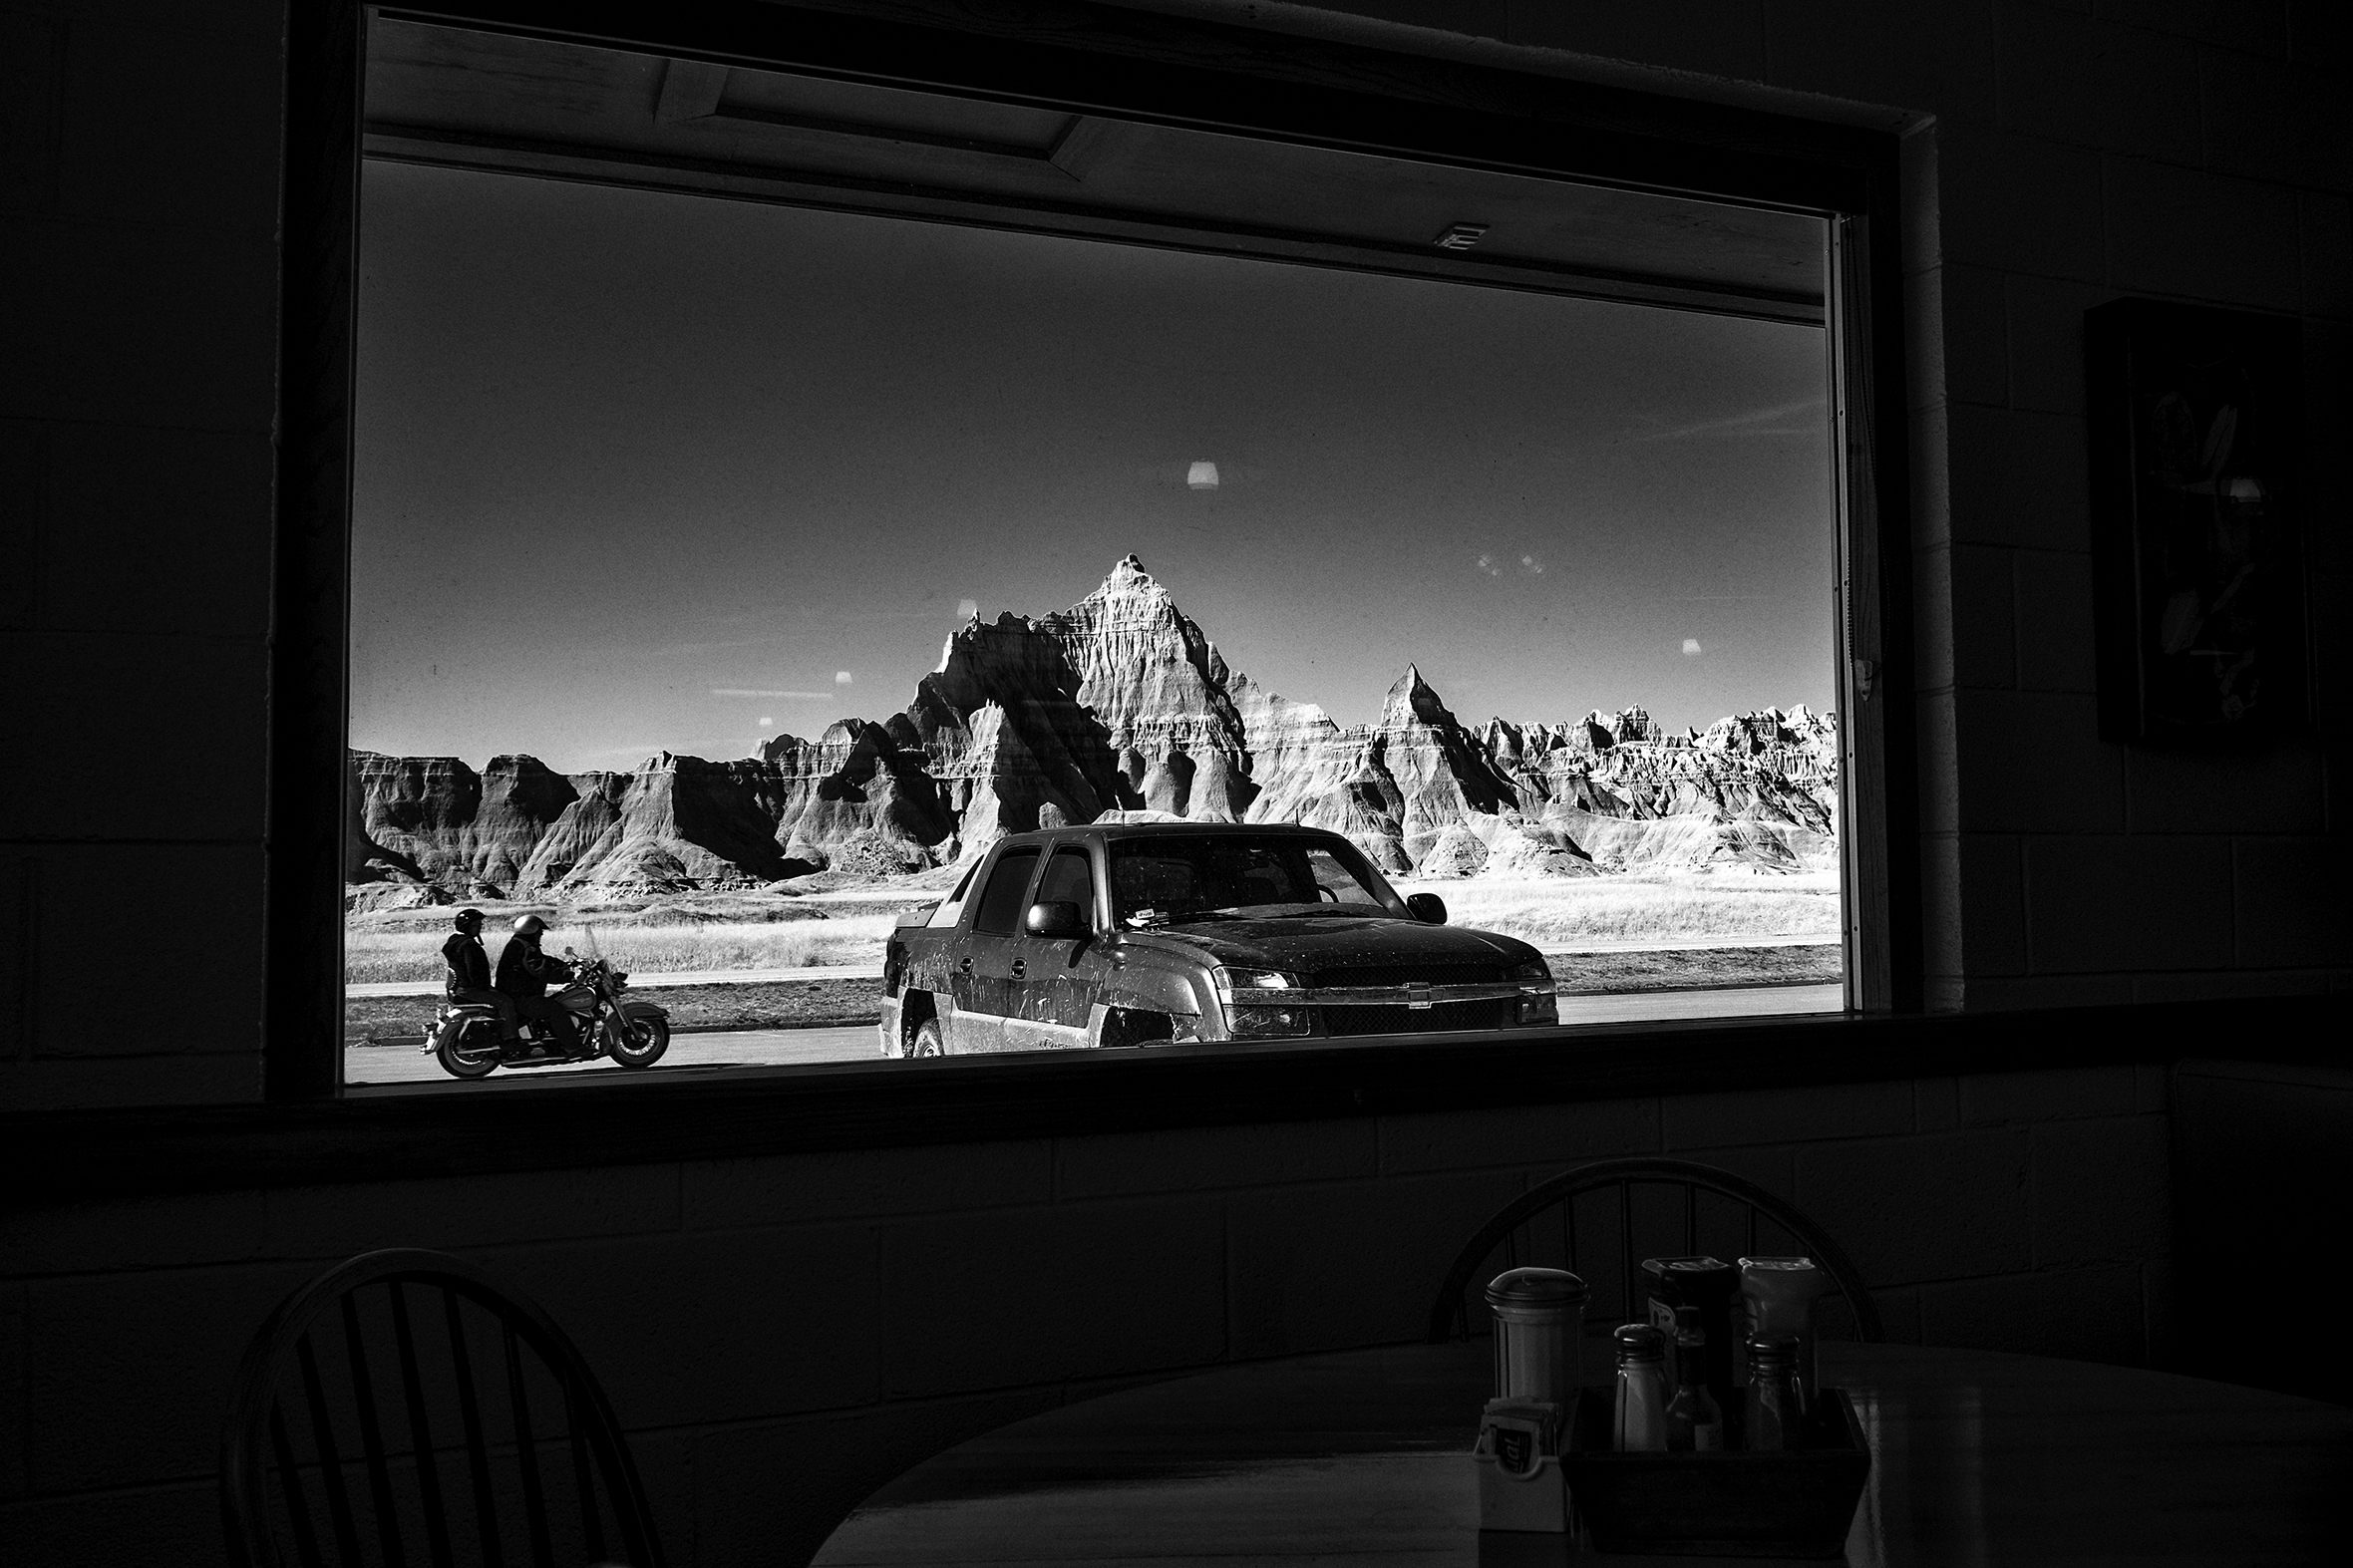 Scenery outside of a diner window of desert cliffs and plateaus in the distance. A truck is parked in front of the window and two people on a motorcycle are riding through the parking lot.